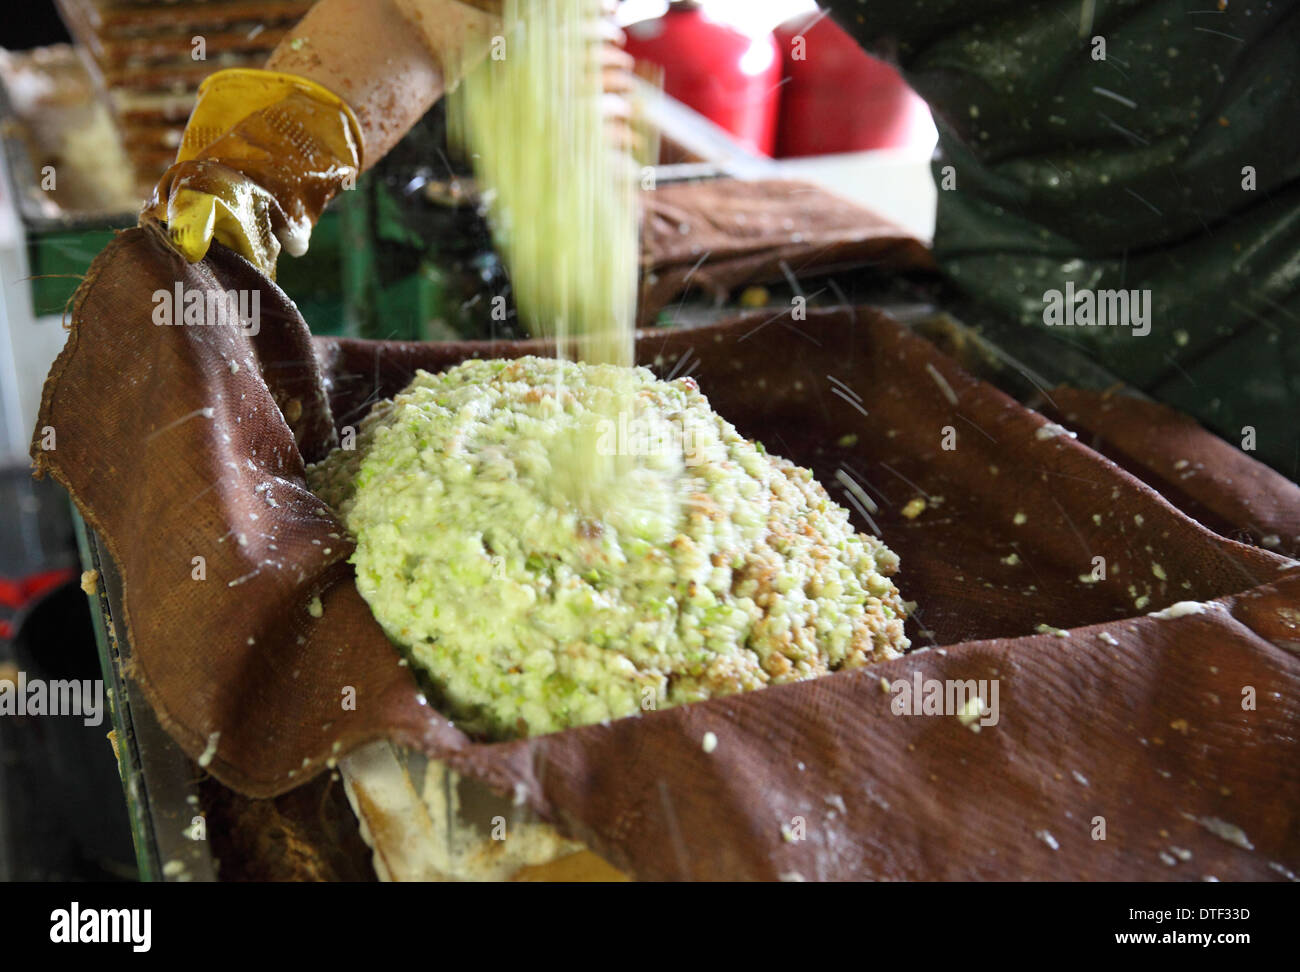 Werder, Germany, in the wage cider Thierschmann crushed fruit is filled in a cloth Stock Photo